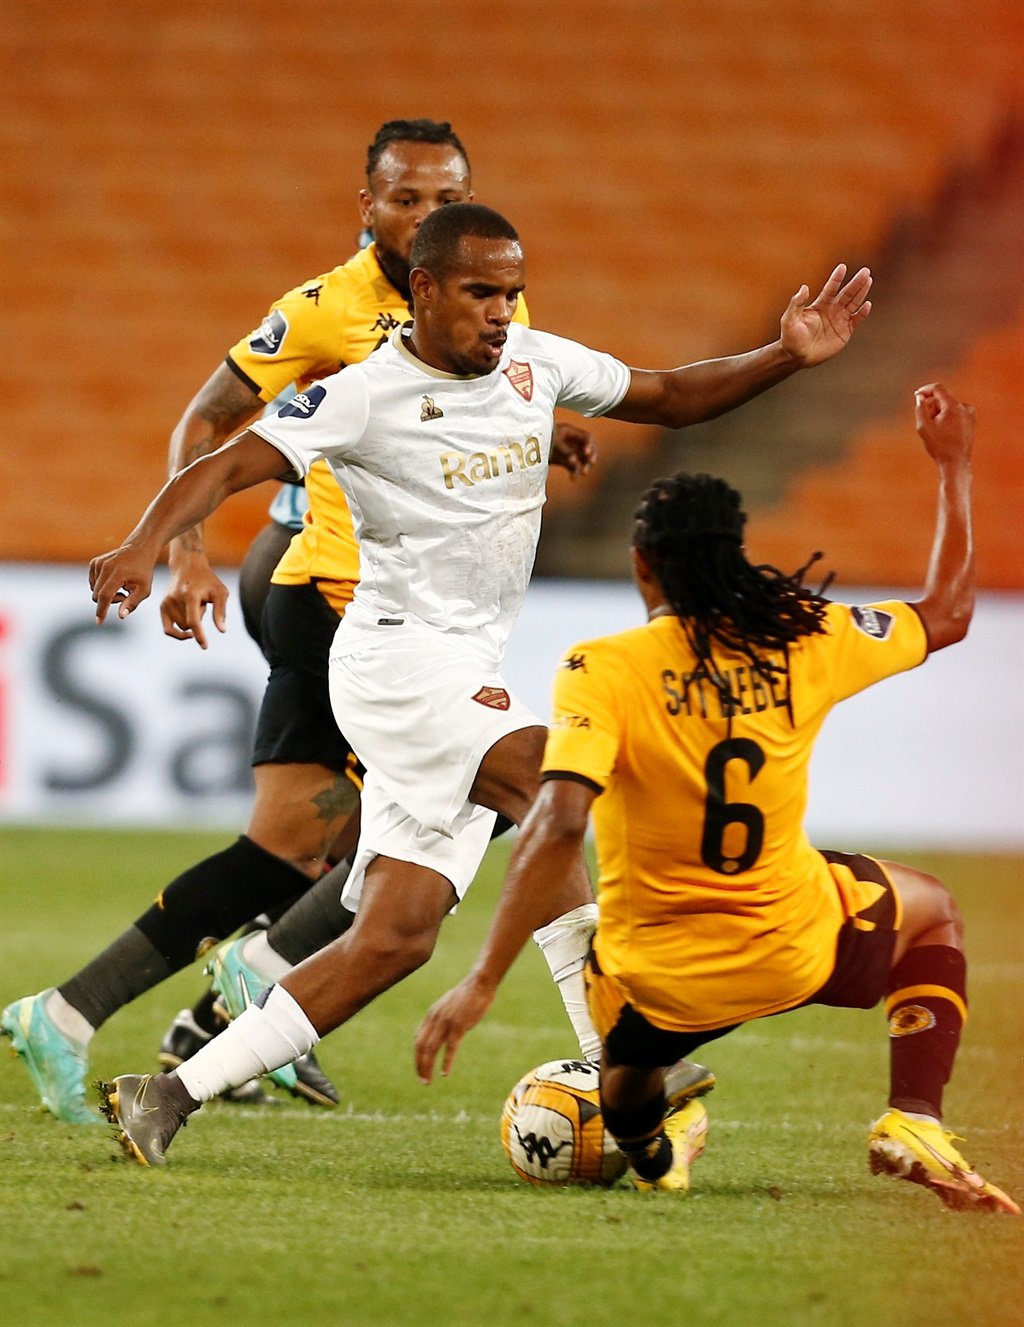 JOHANNESBURG, SOUTH AFRICA - APRIL 02: Edmilson Dove and Siyethemba Sithebe of Kaizer Chiefs in action with Iqraam Ryners of Stellenbosch FC during the DStv Premiership match between Kaizer Chiefs and Stellenbosch FC at FNB Stadium on April 02, 2024 in Johannesburg, South Africa. (Photo by Gallo Images)